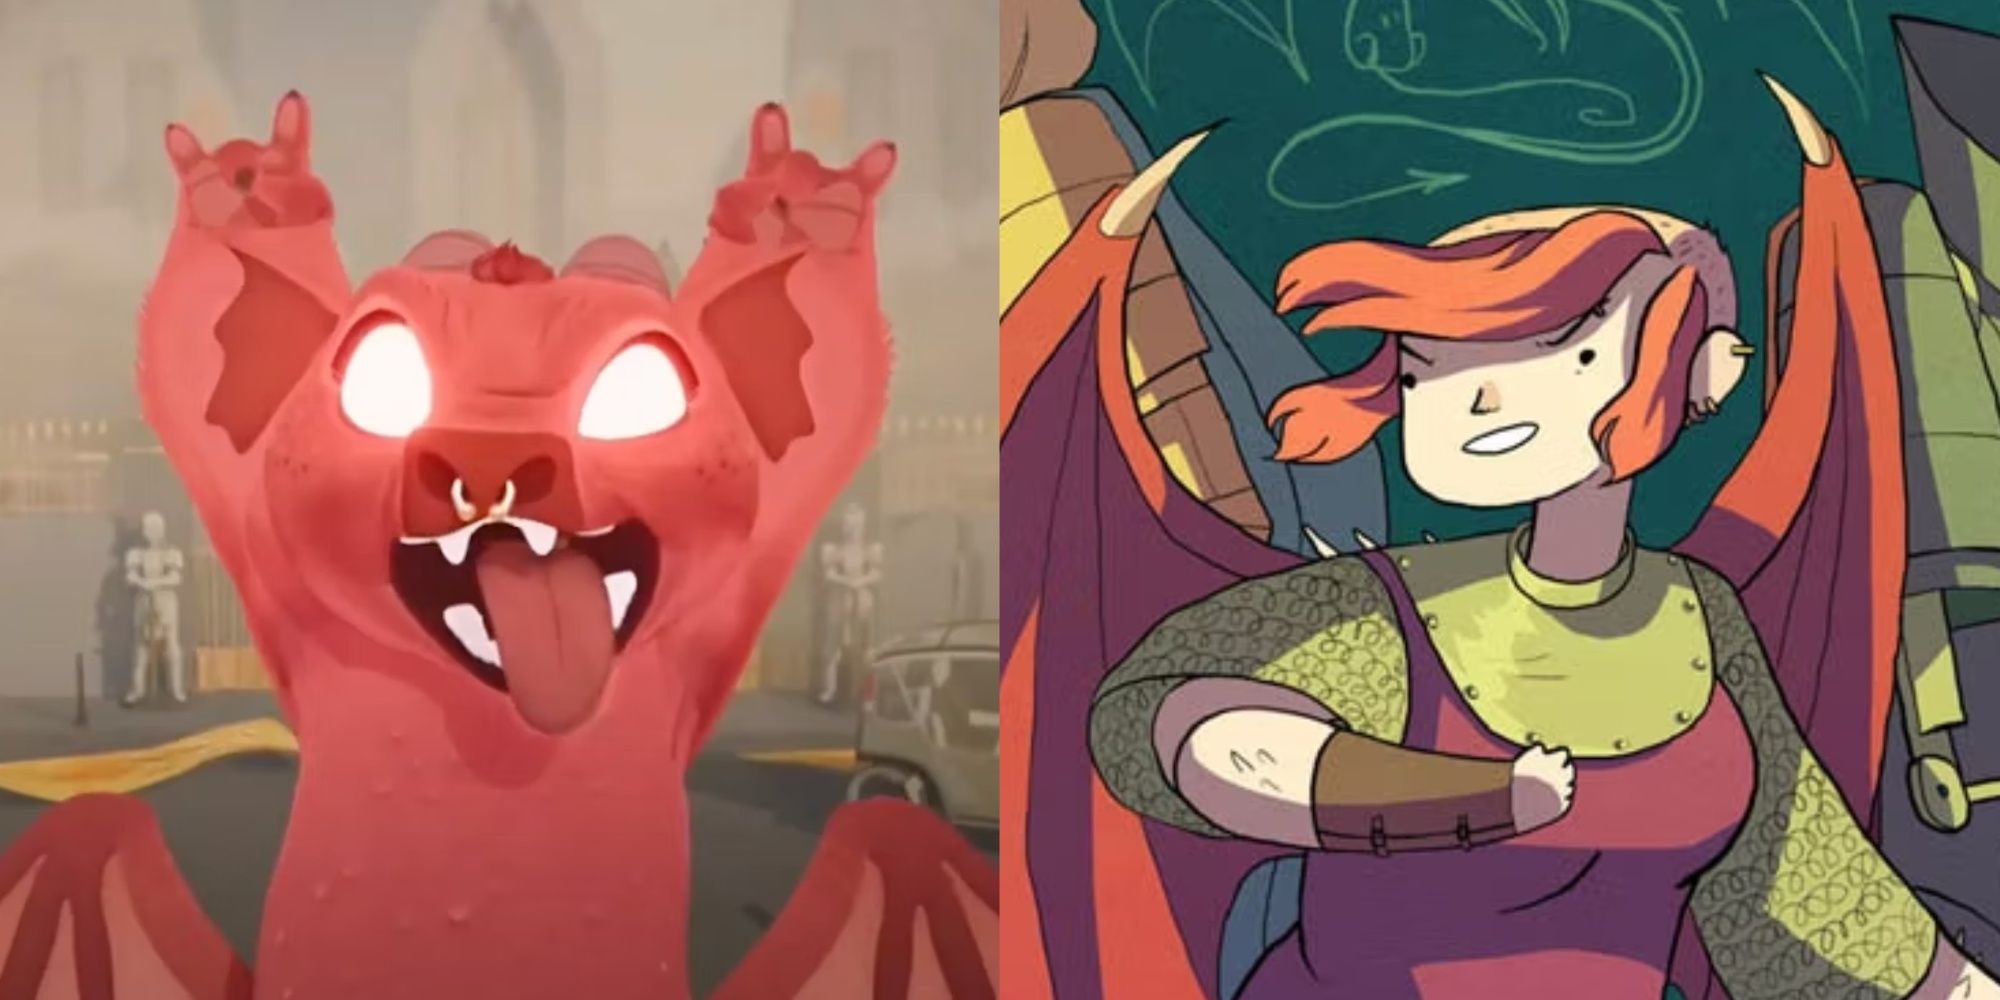 A split image of animated Nimona as a dragon and bat-winged Nimona from the comic